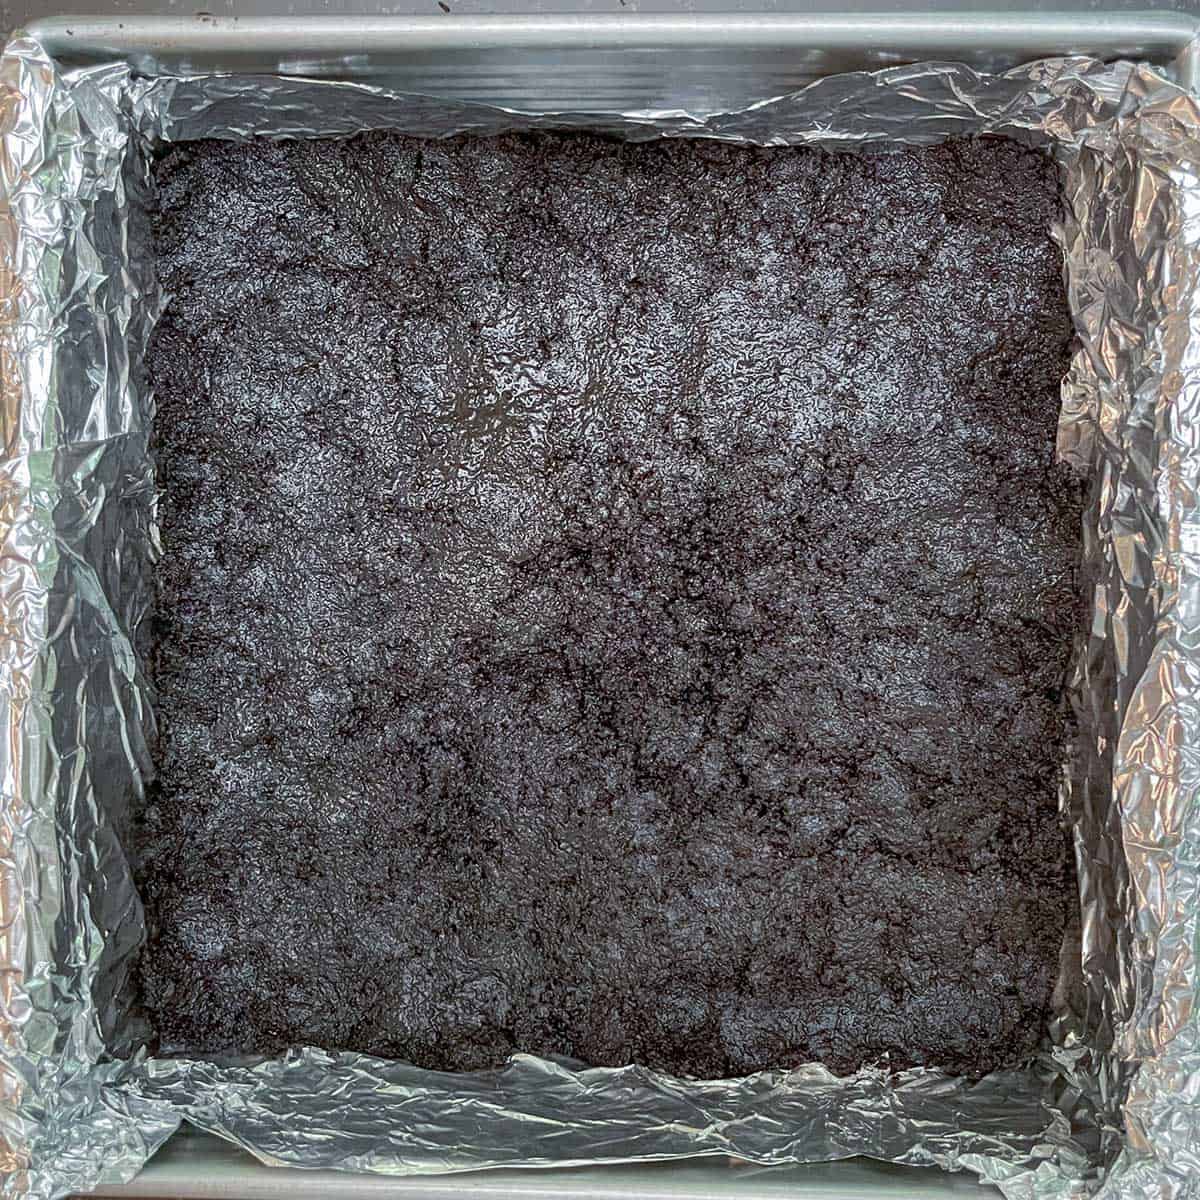 Oreo crust pressed down to cover the bottom of the tinfoil-lined pan.